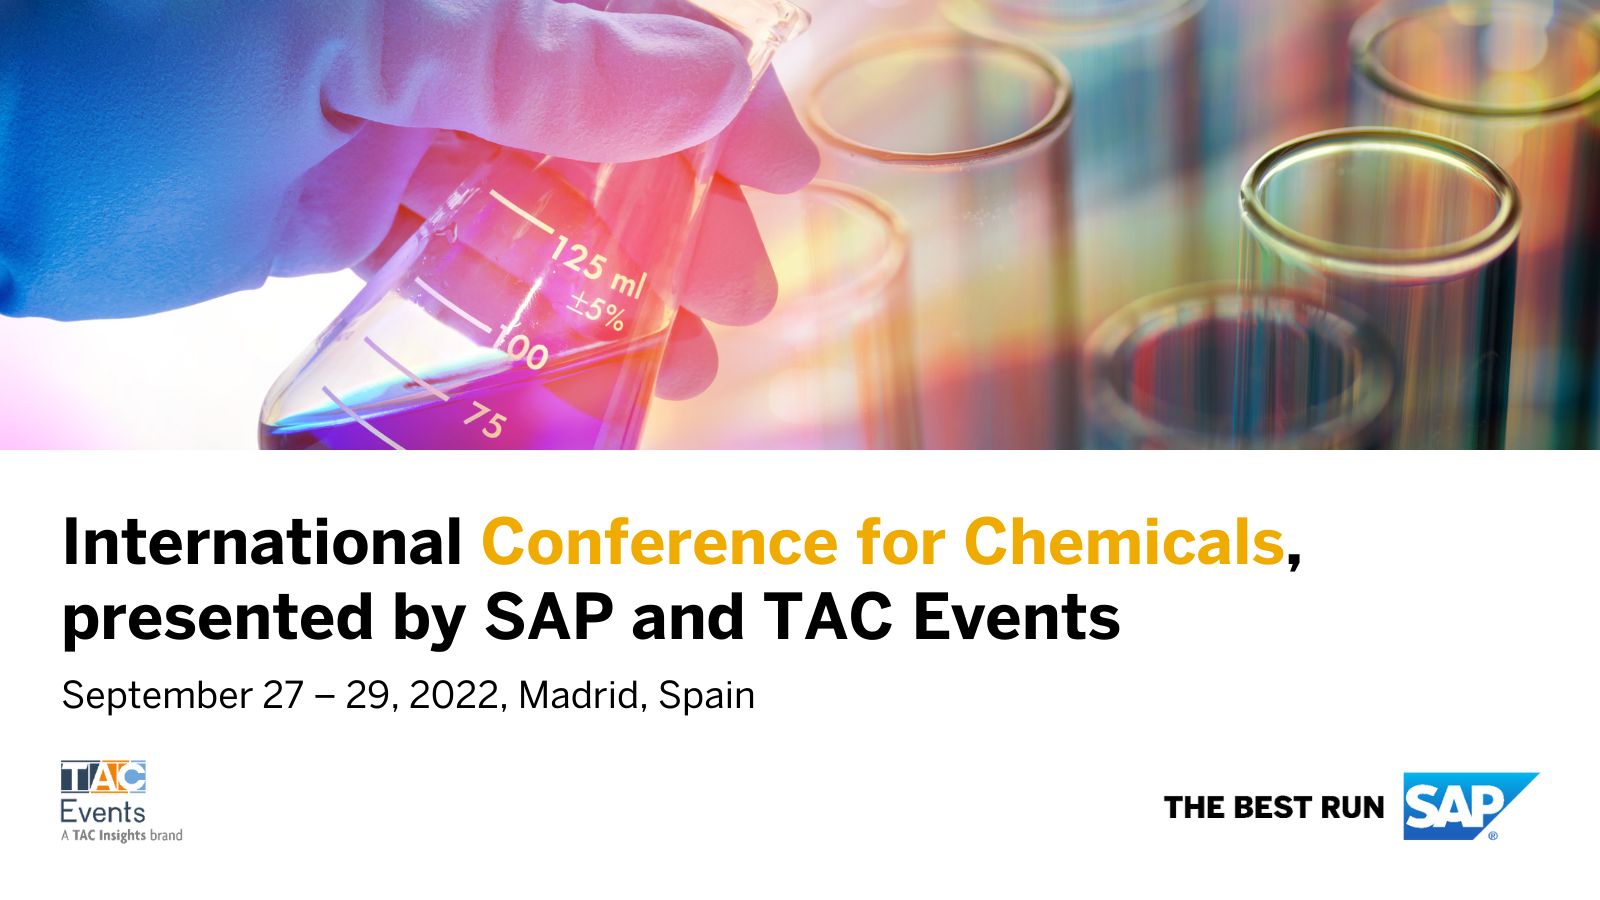 International Conference for Chemicals, presented by SAP and TAC Events, Madrid, Comunidad de Madrid, Spain